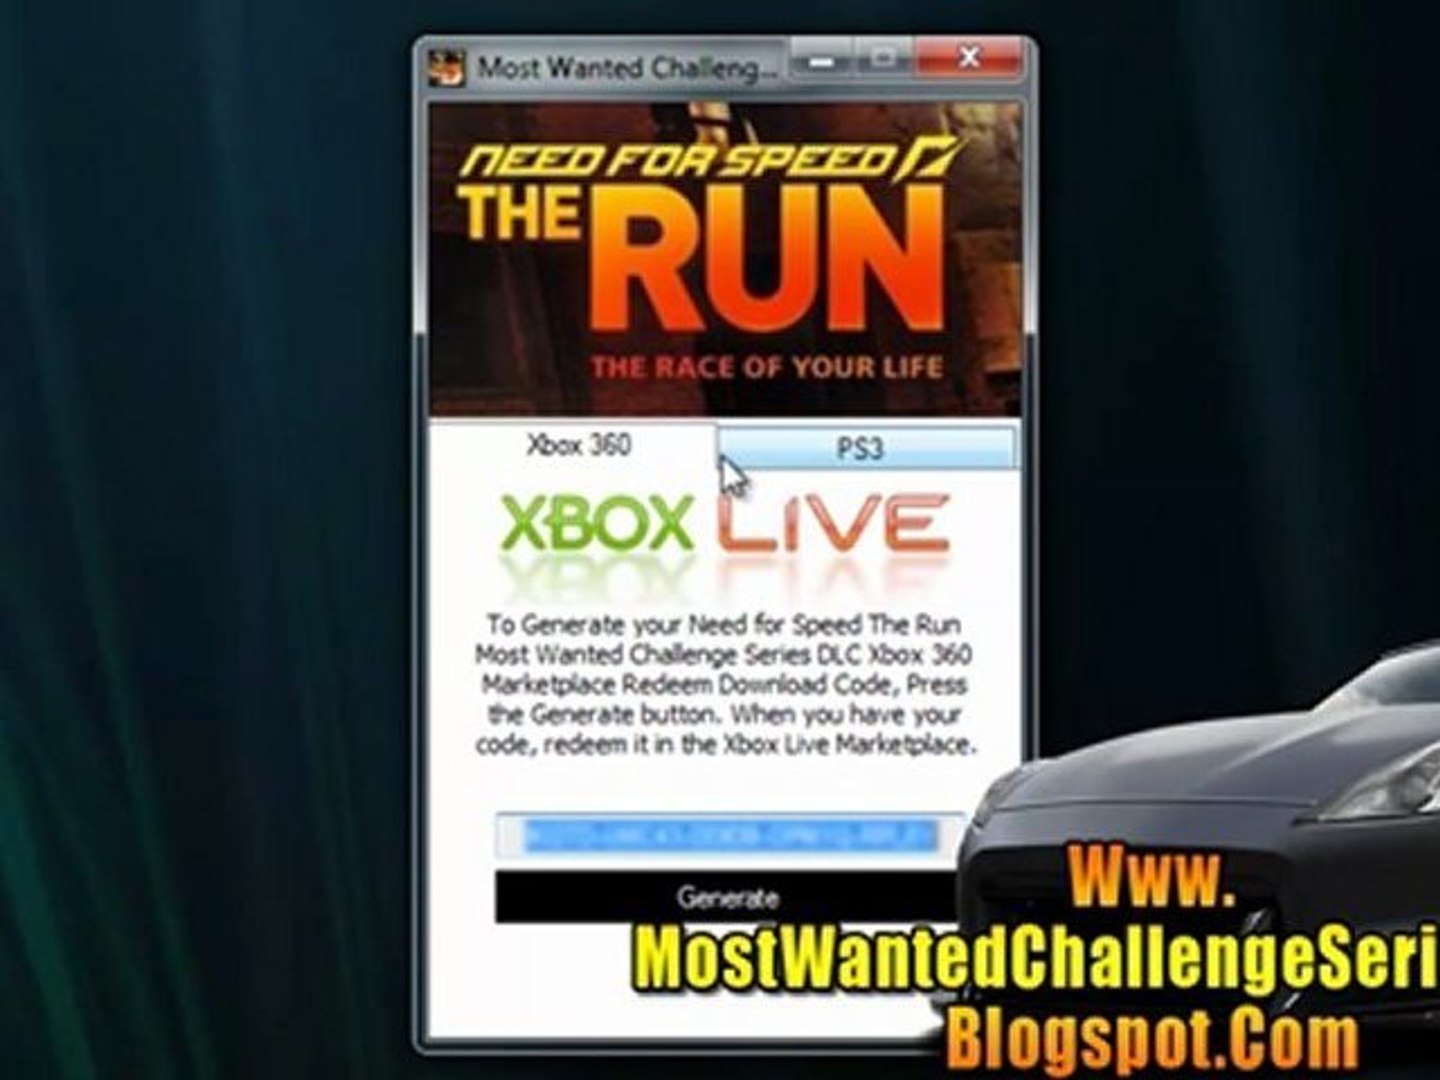 Achternaam lijden Trunk bibliotheek Need for Speed The Run Most Wanted Challenge Series DLC Free on Xbox 360  And PS3 - video Dailymotion